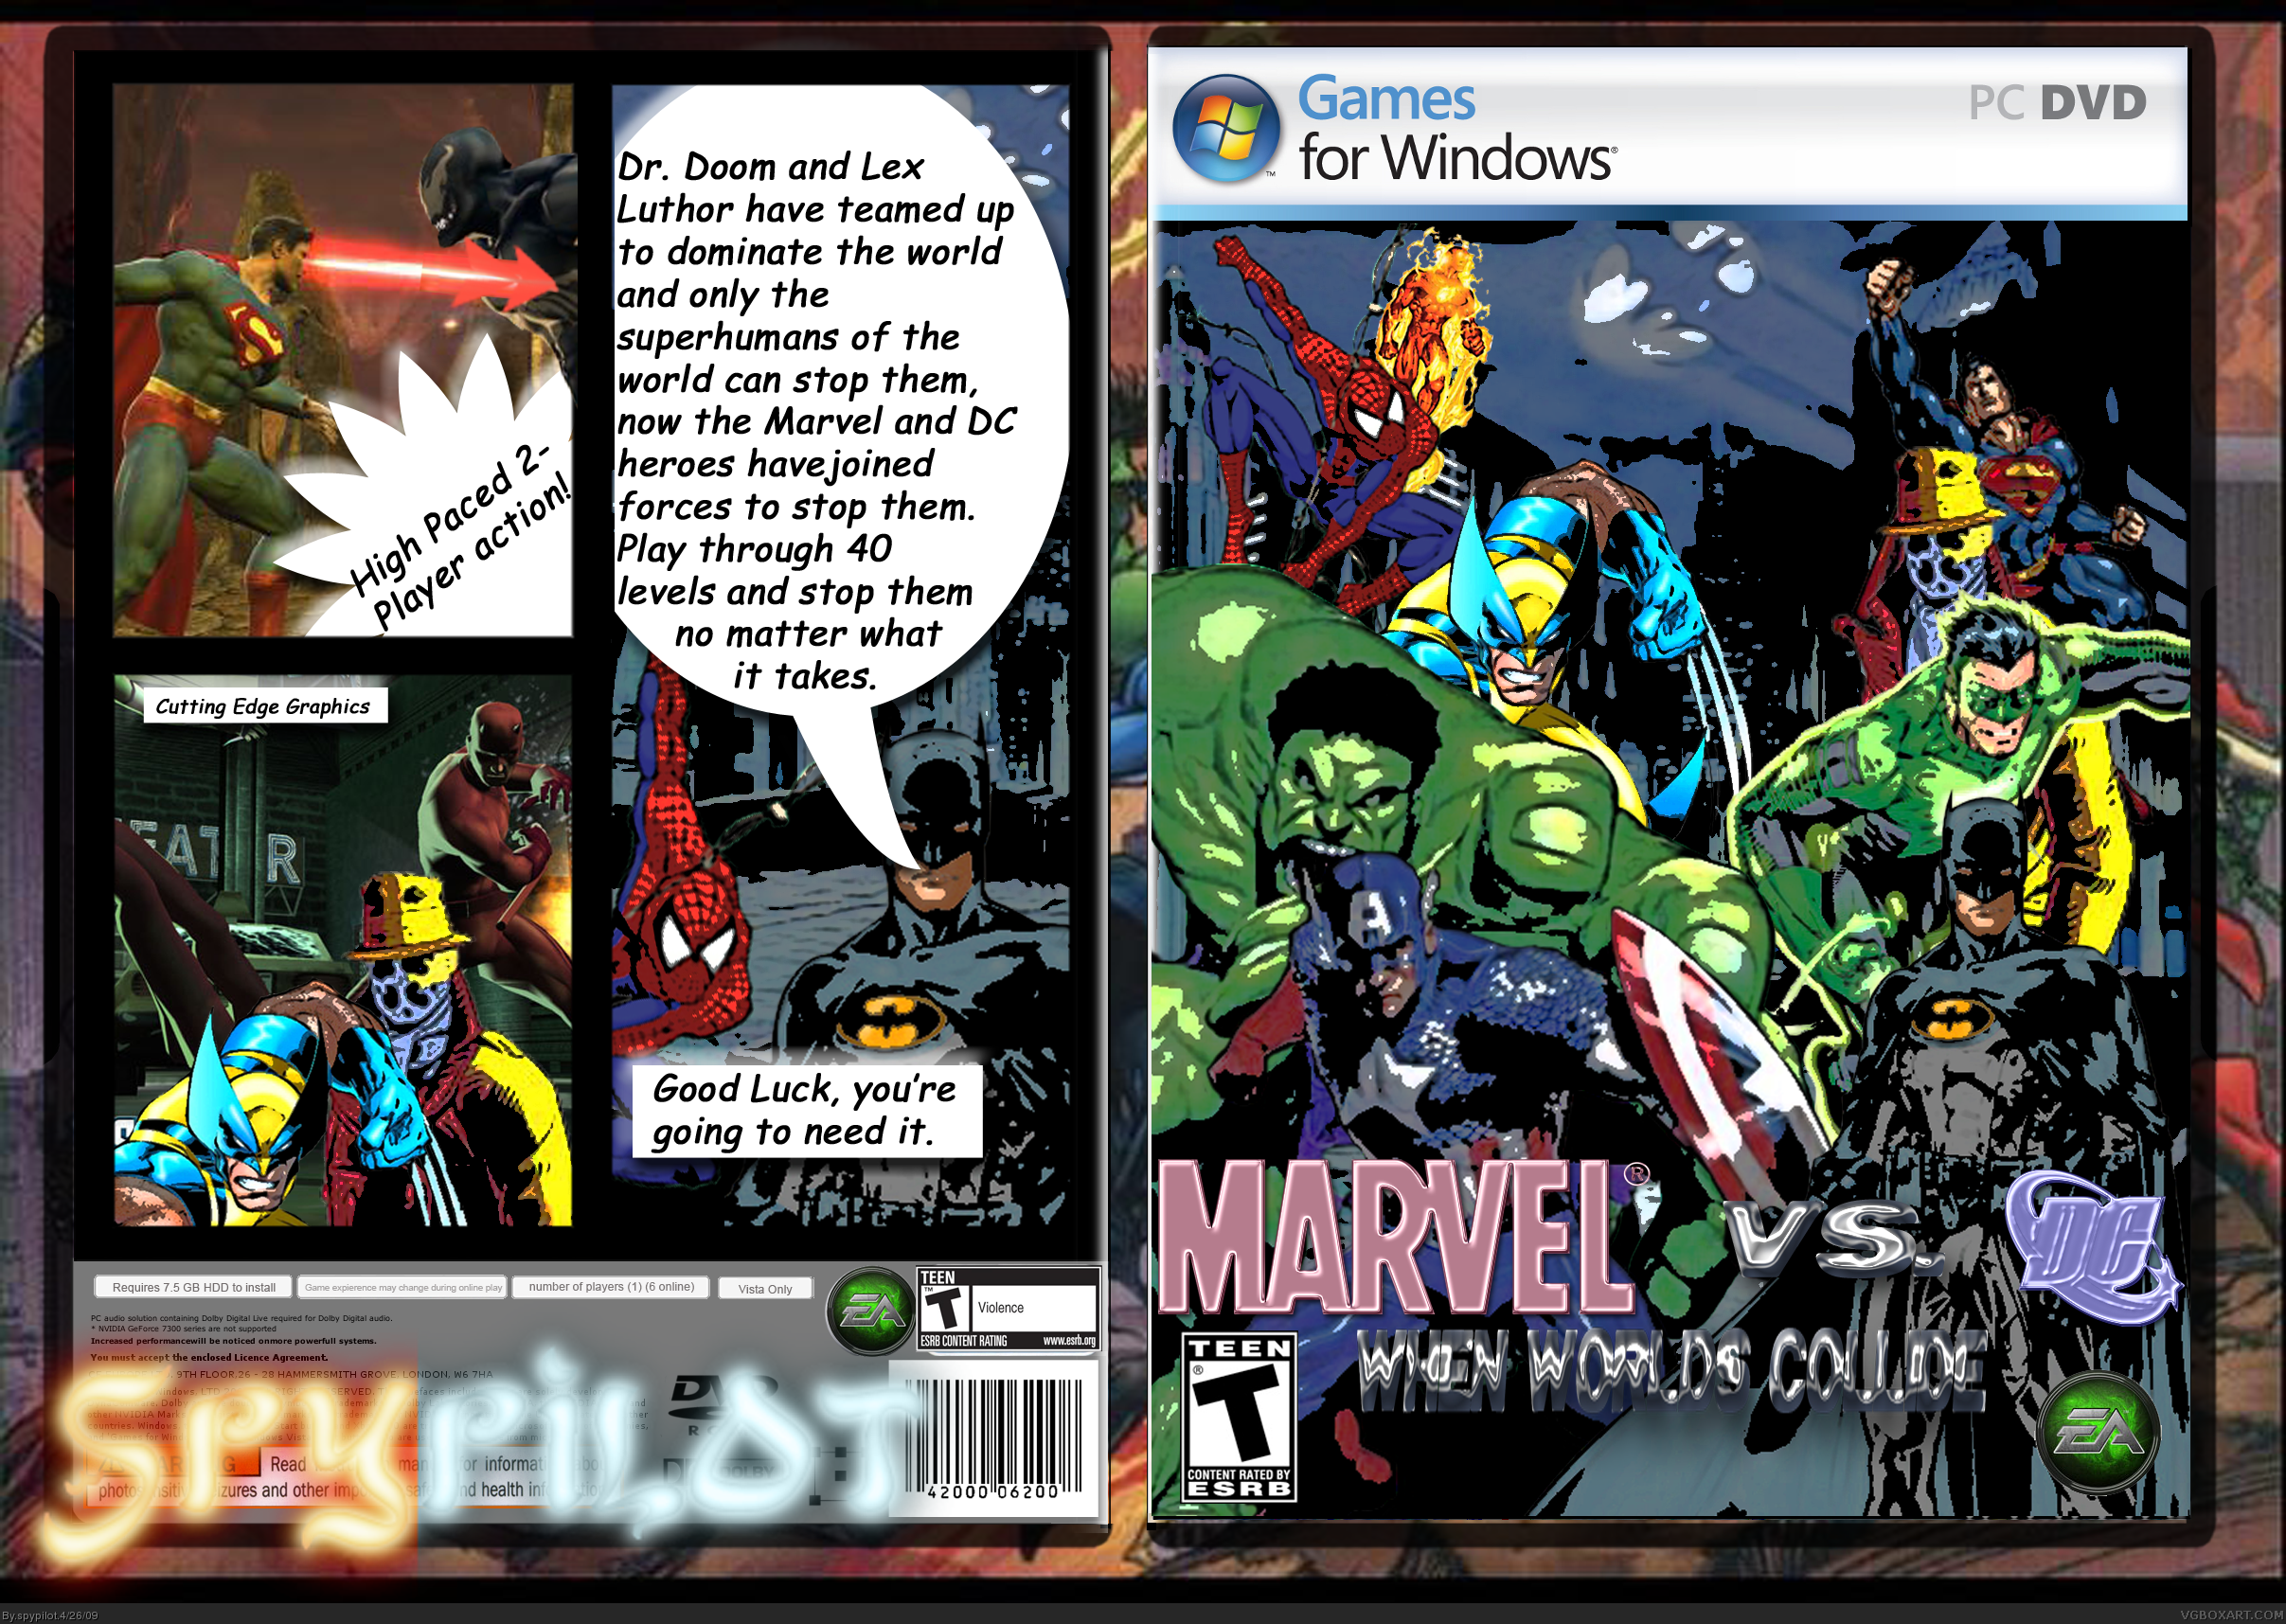 Marvel vs. DC: When worlds collide box cover